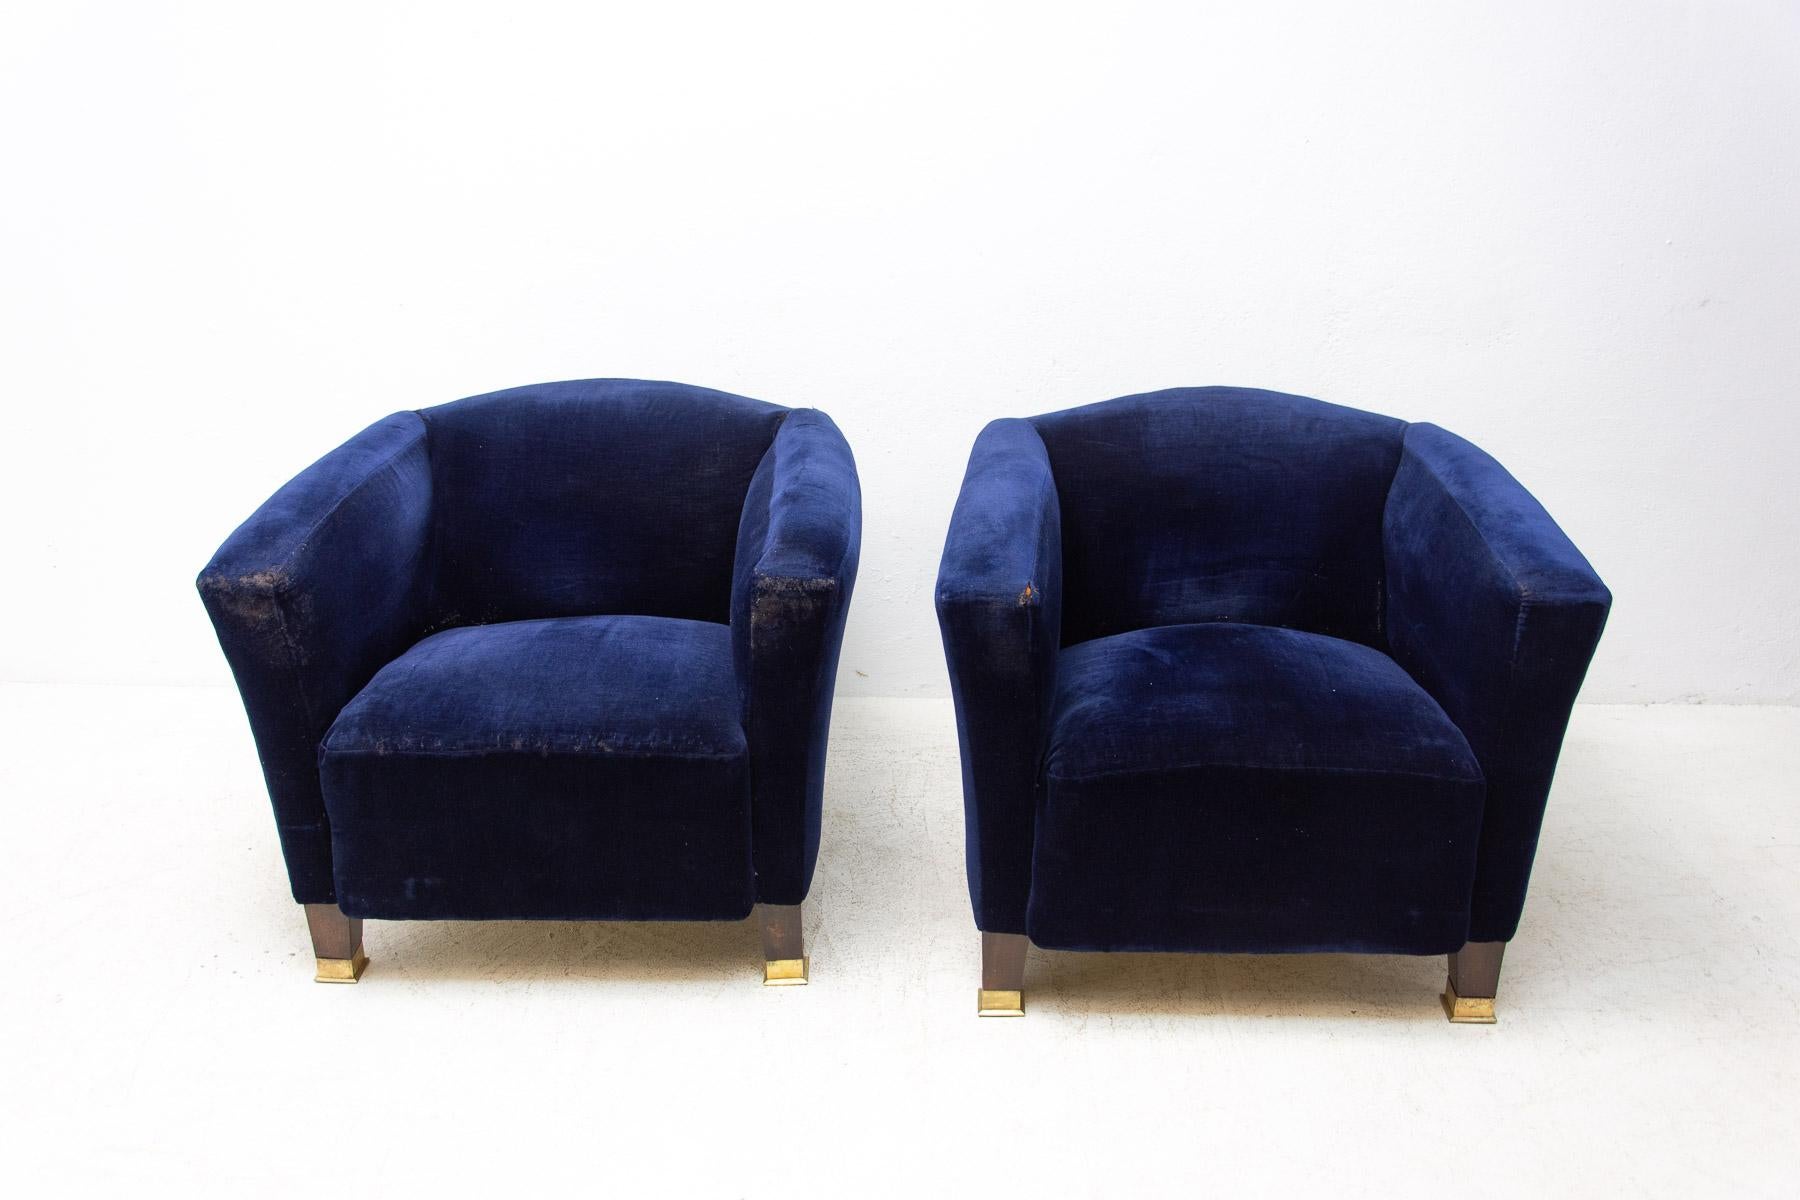 A pair of Art Nouveau comfortable club armchairs, they were made in Austria Hungary around 1915.

Structurally in good Vintage condition, the fabric is already worn in several places.

Measures: height: 68 cm, width: 85cm, depth: 78cm

Price